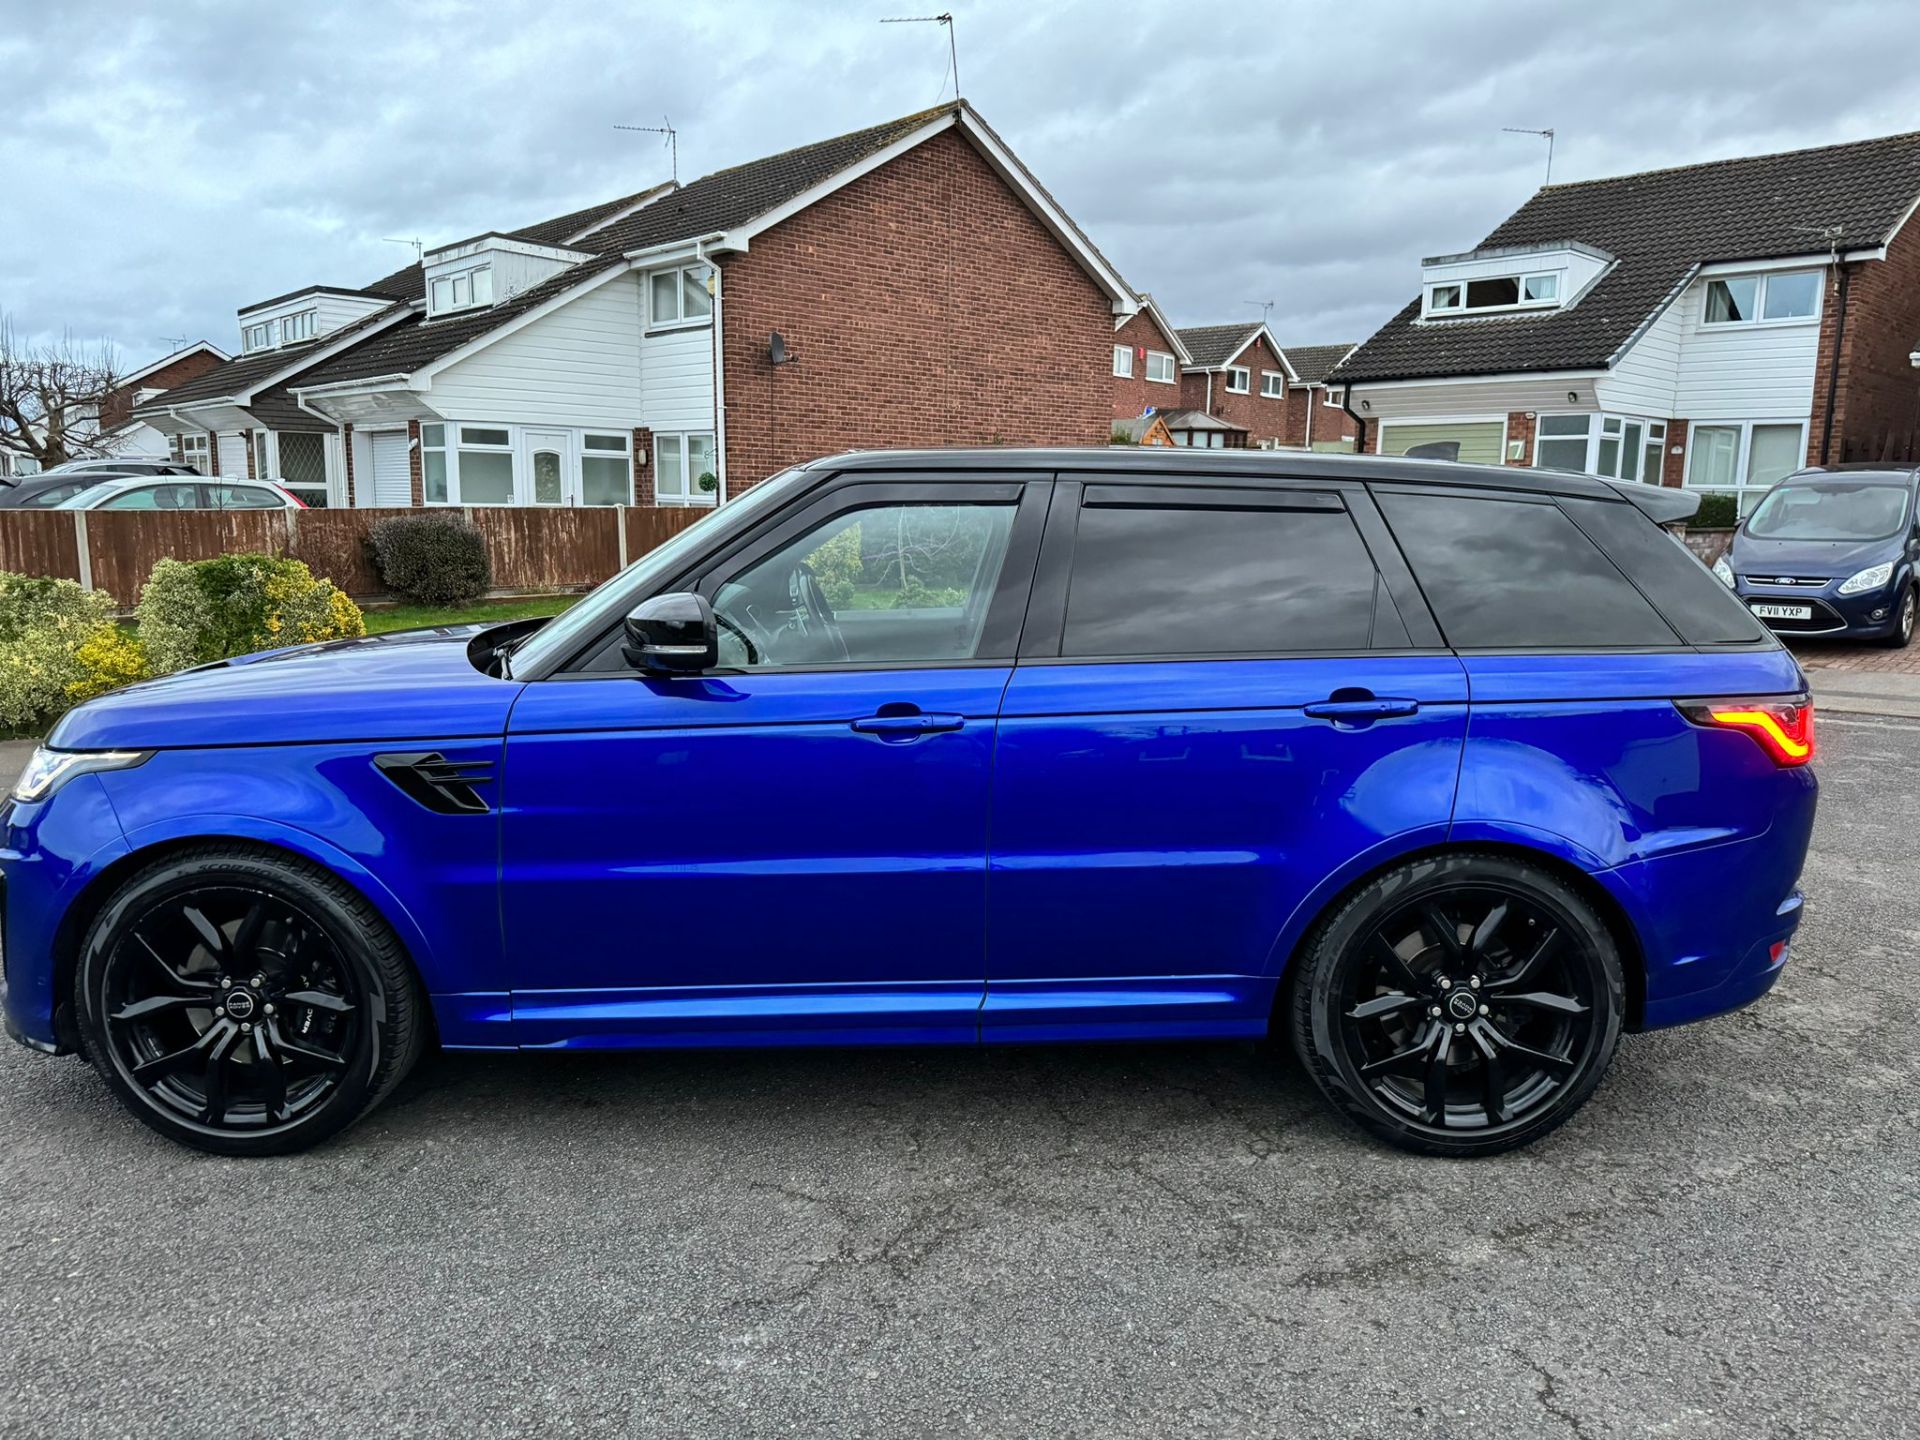 2018 18 RANGE ROVER SVR - 62K MILES WITH FULL LAND ROVER HISTORY - EXTREMELY CLEAN EXAMPLE. - Image 6 of 10